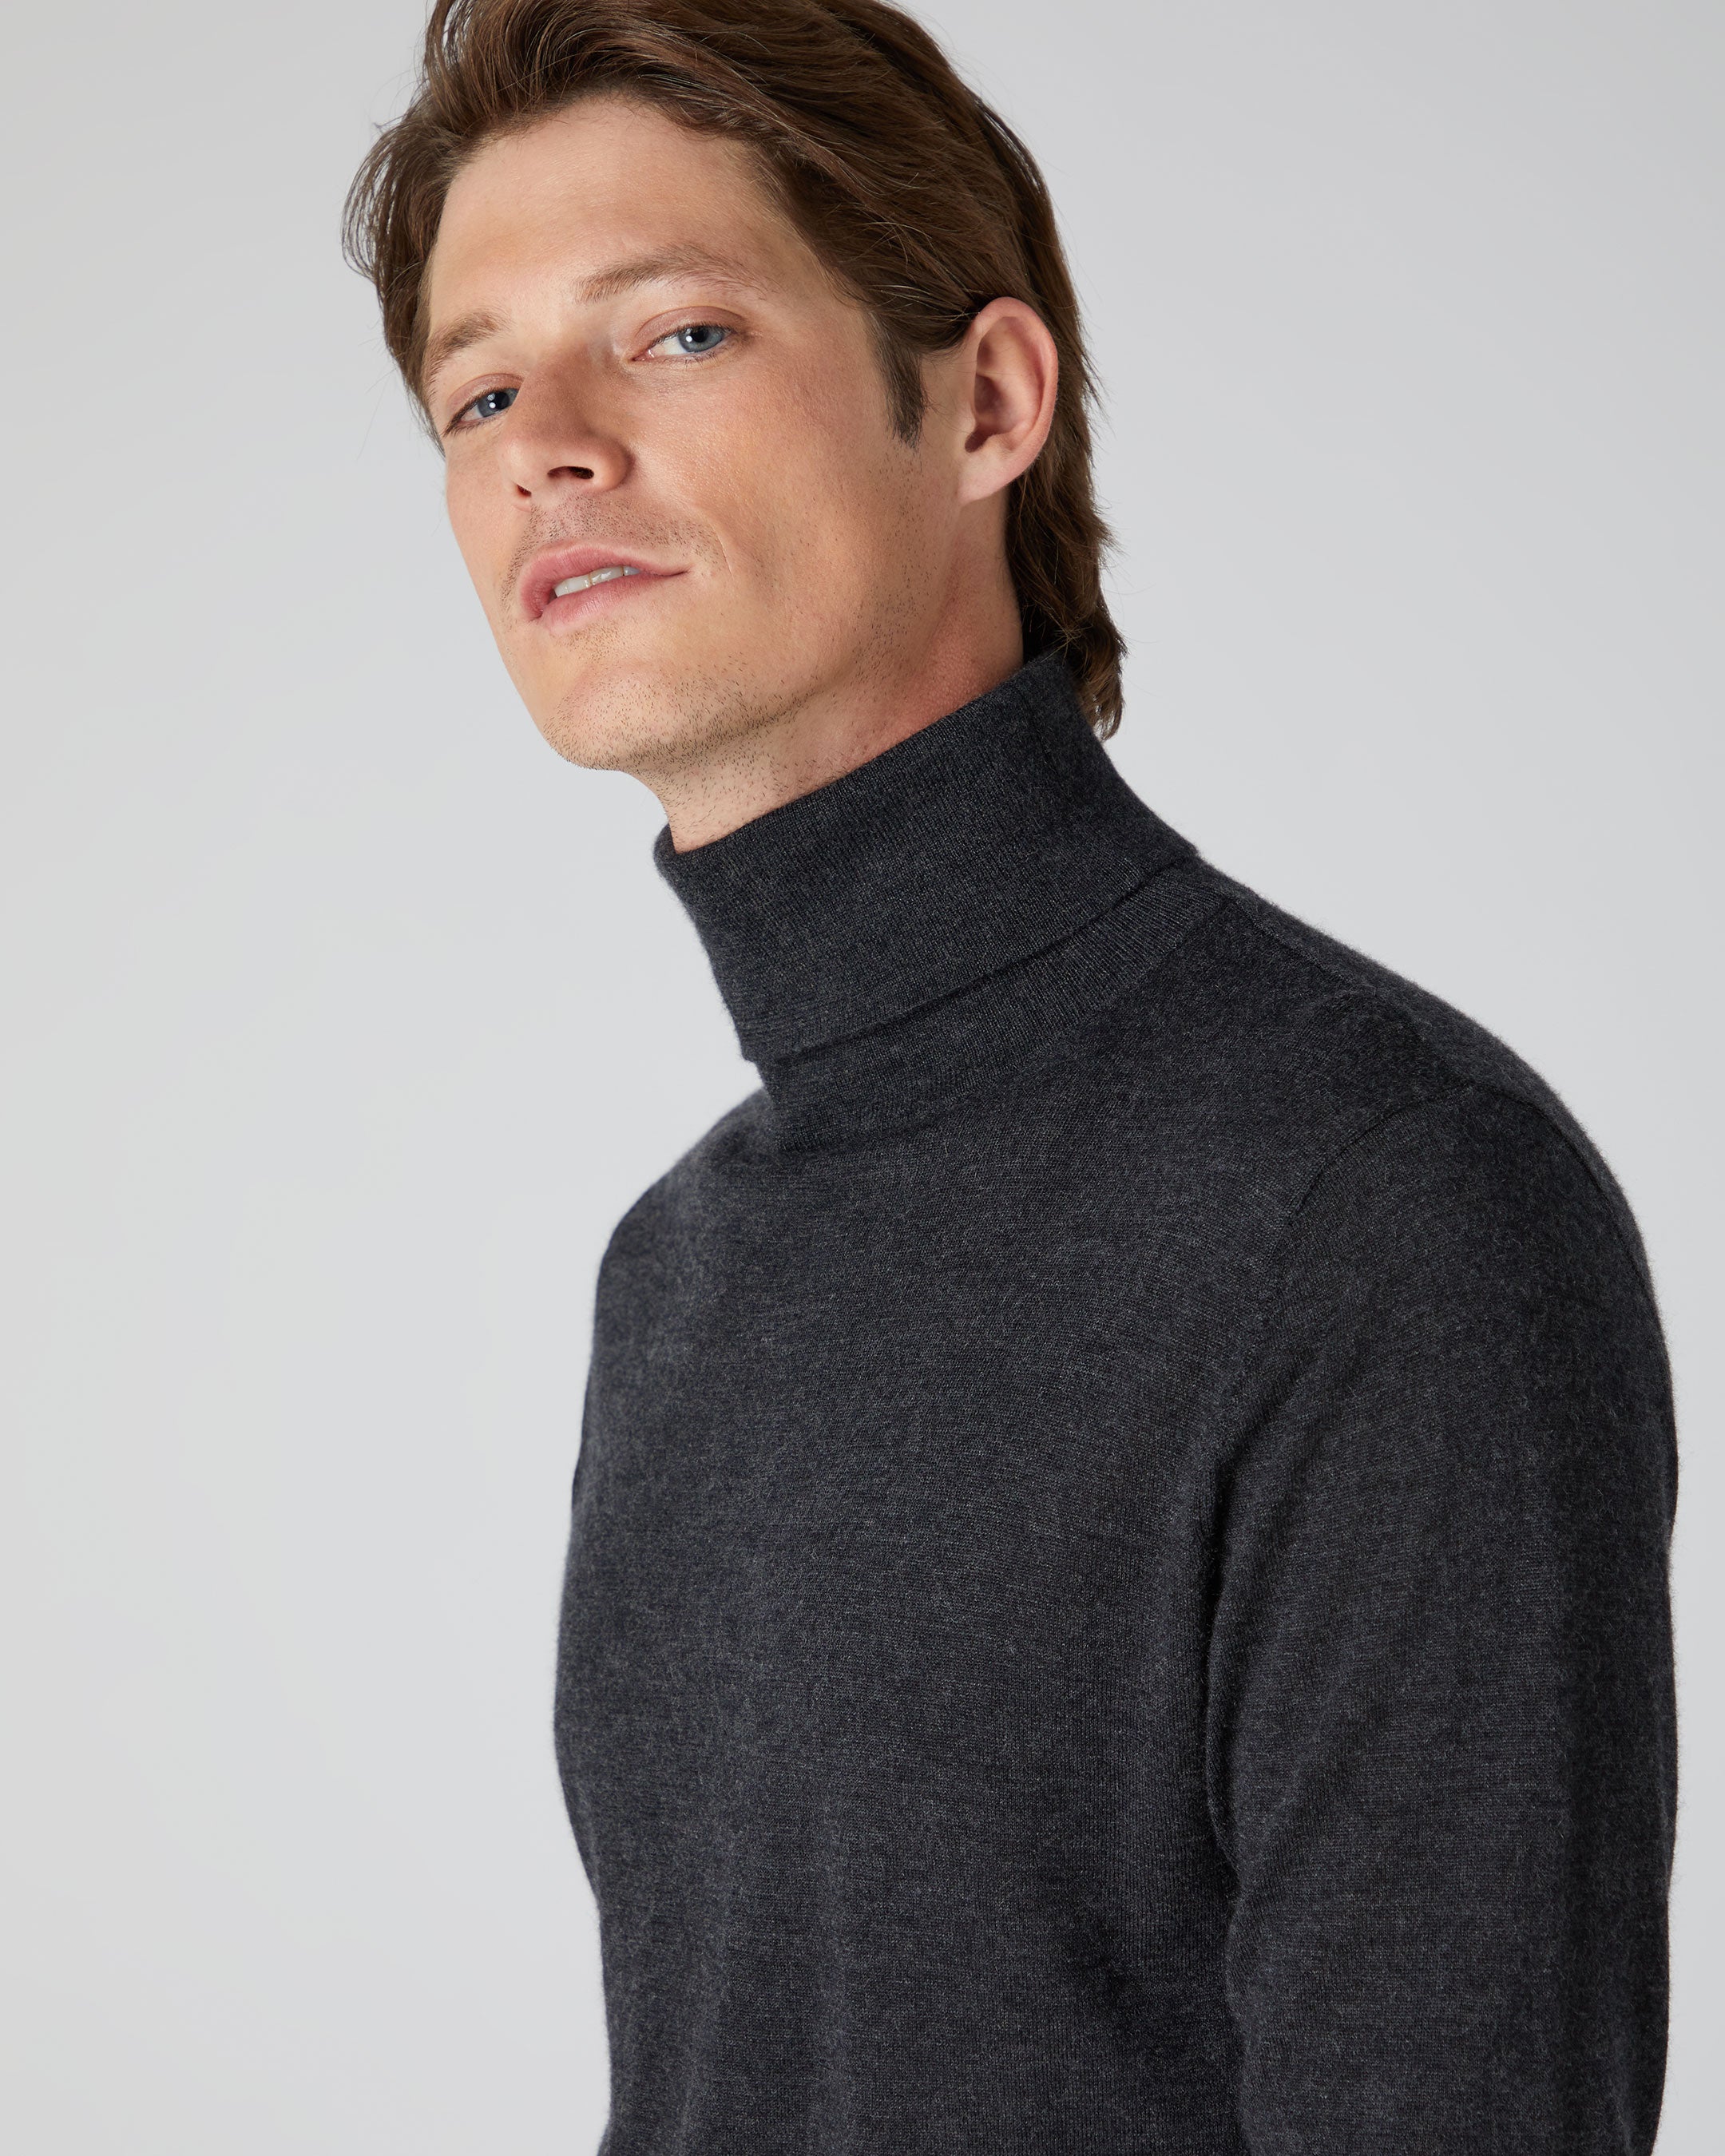 N.Peal Chunky Cable roll-neck jumper - Black